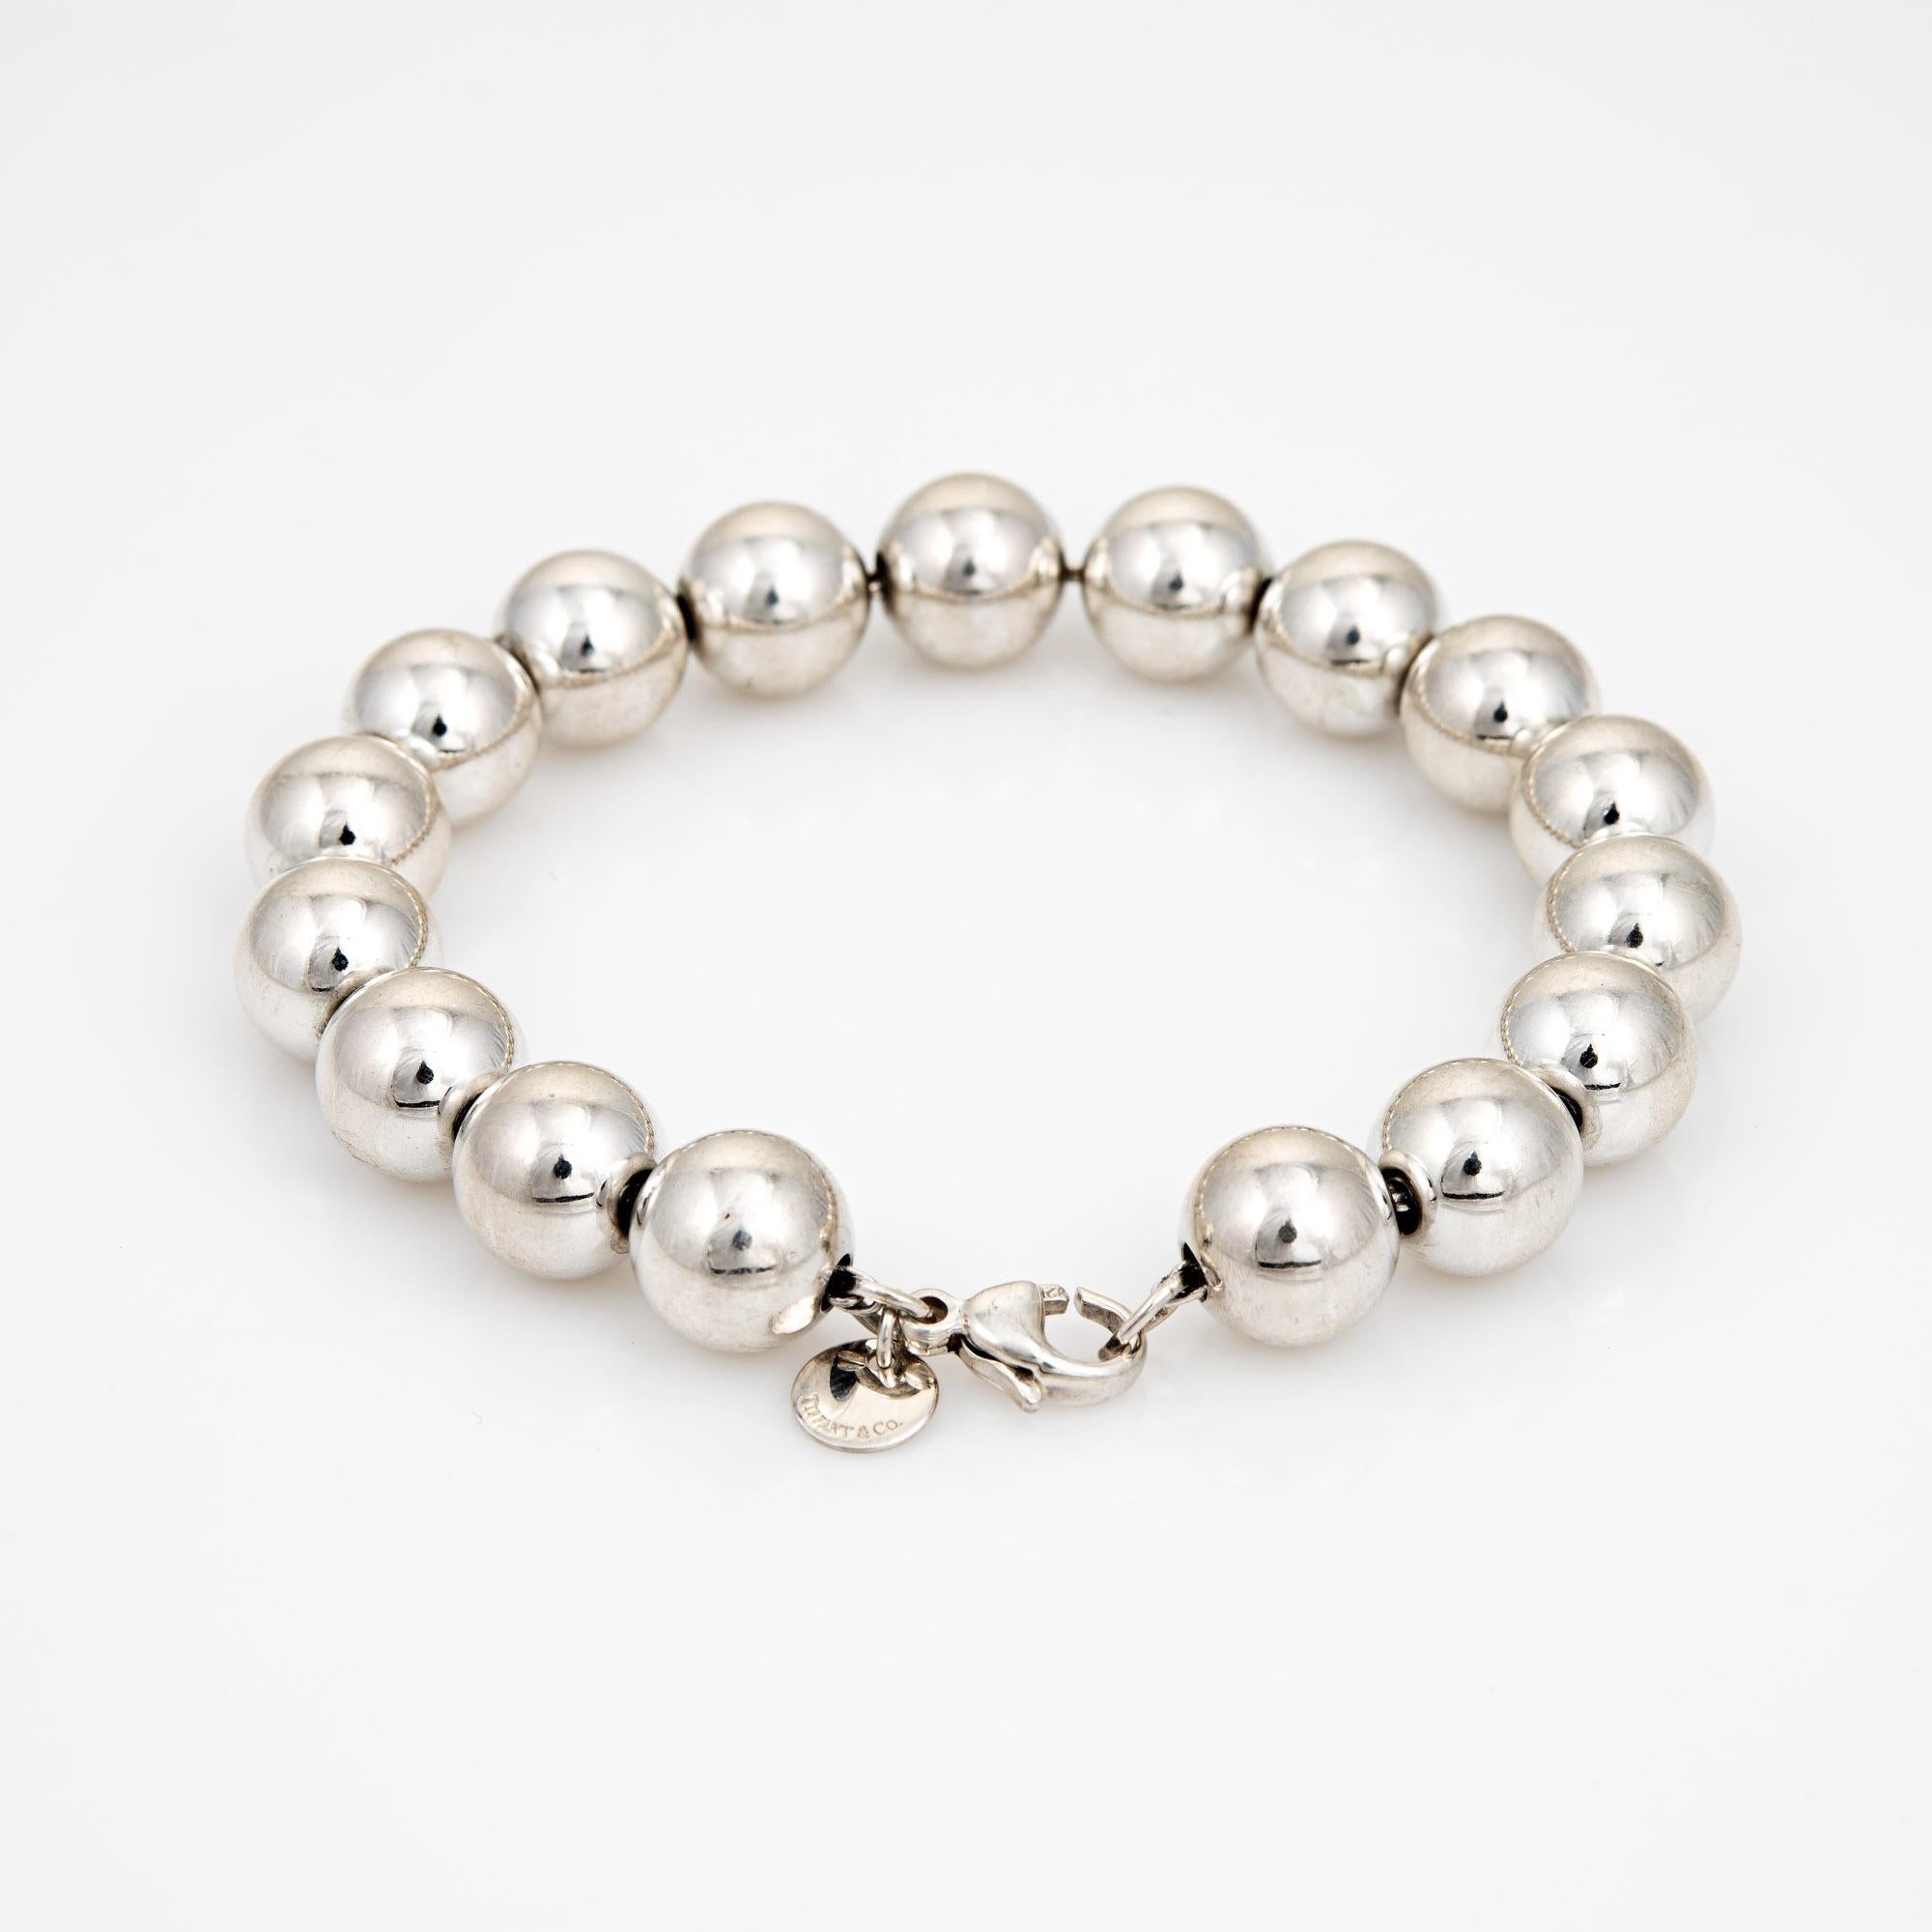 Stylish pre-owned Tiffany & Co graduated silver bead bracelet crafted in 925 sterling silver.  

The bracelet features silver beads that are uniform in size (10mm). Great worn alone or layered with your fine jewelry from any era.

The bracelet is in